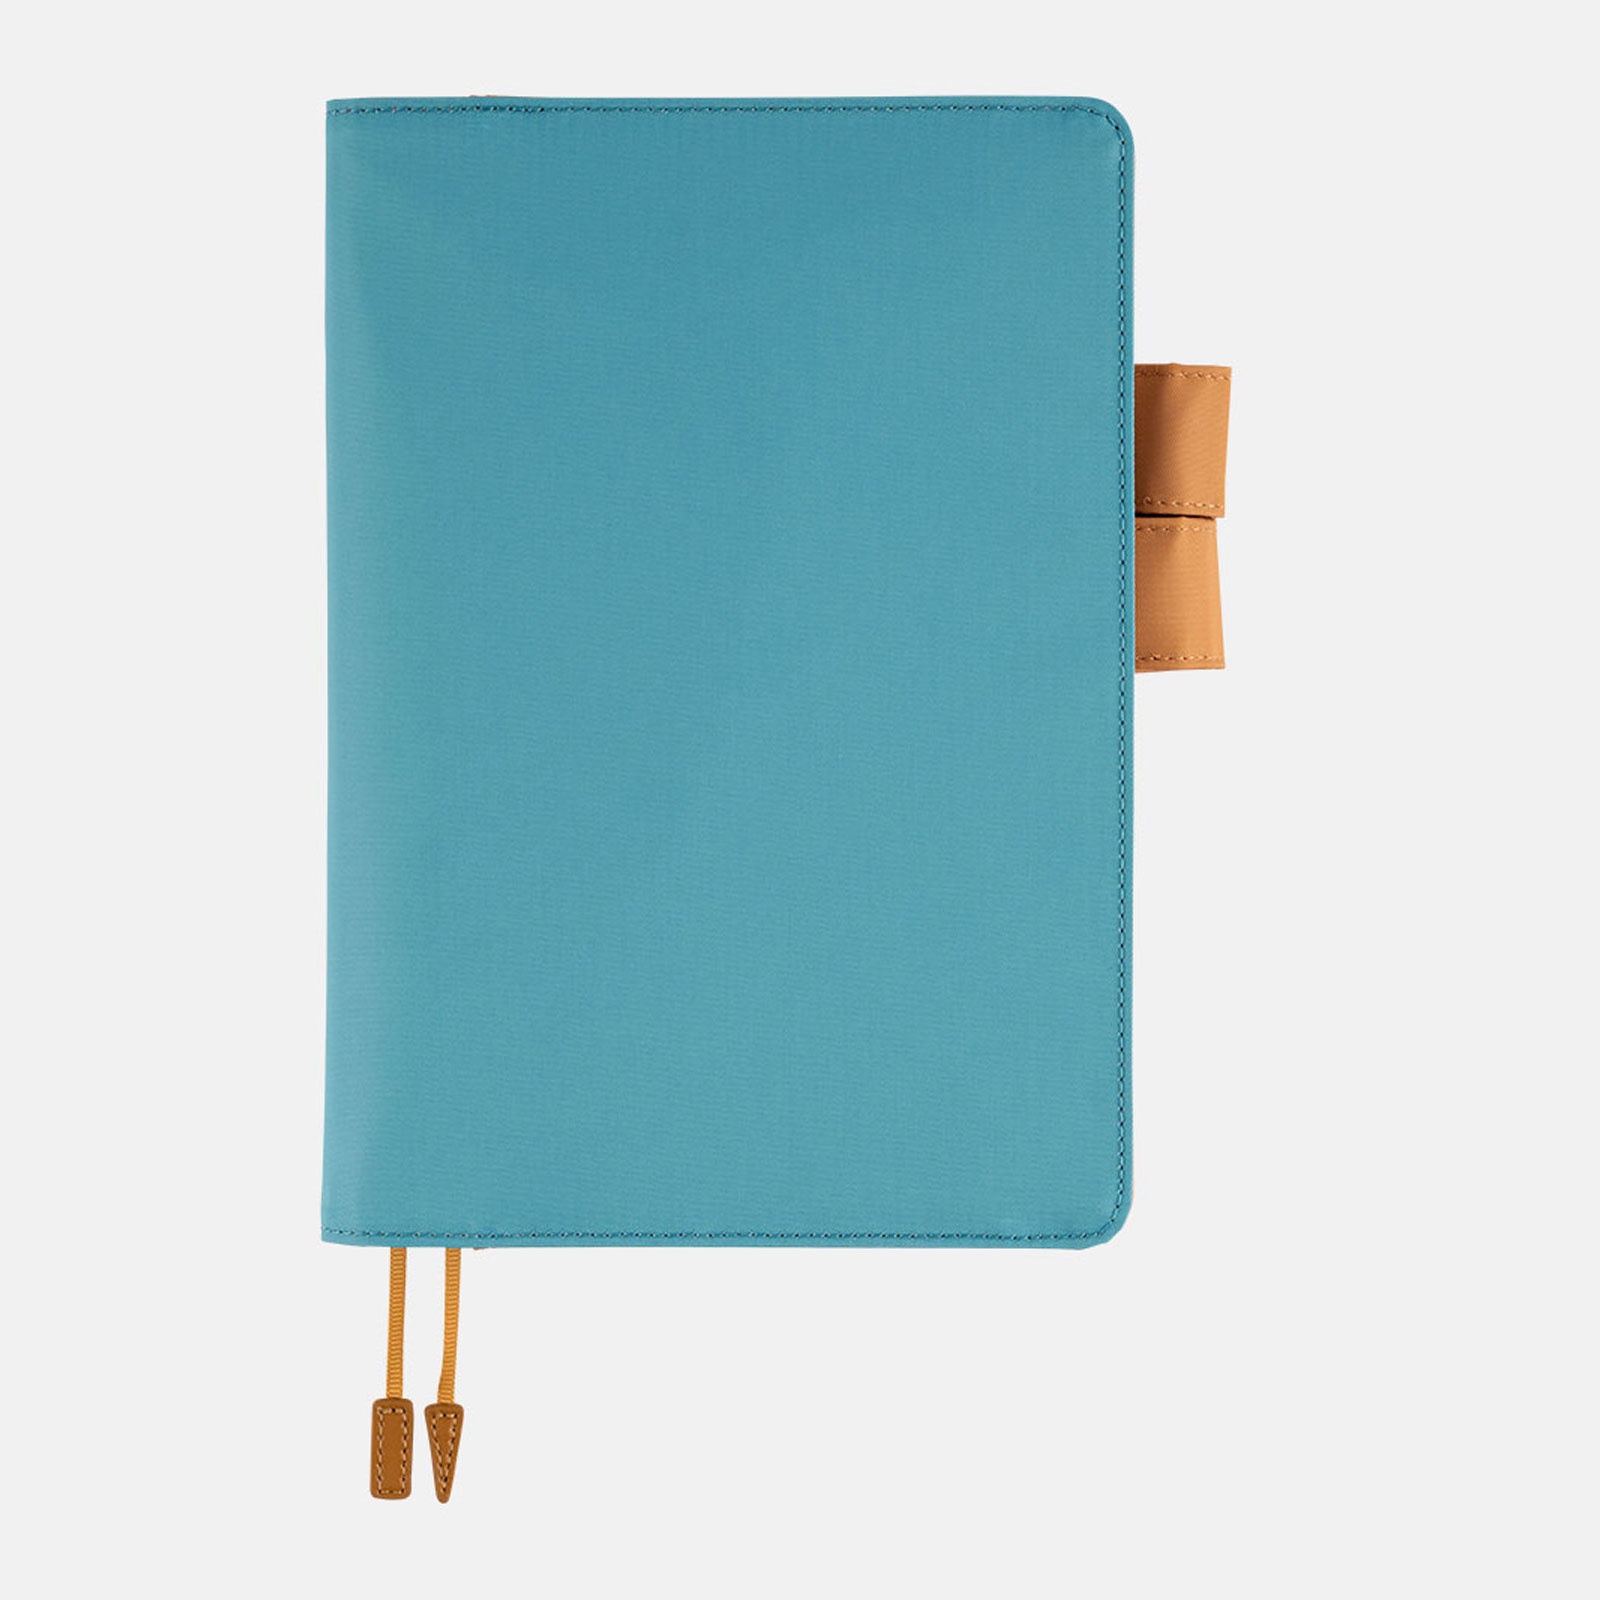 Shall we have some tea A5 Size Cover ONLY Hobonichi 2022 Omiya Yogashiten 